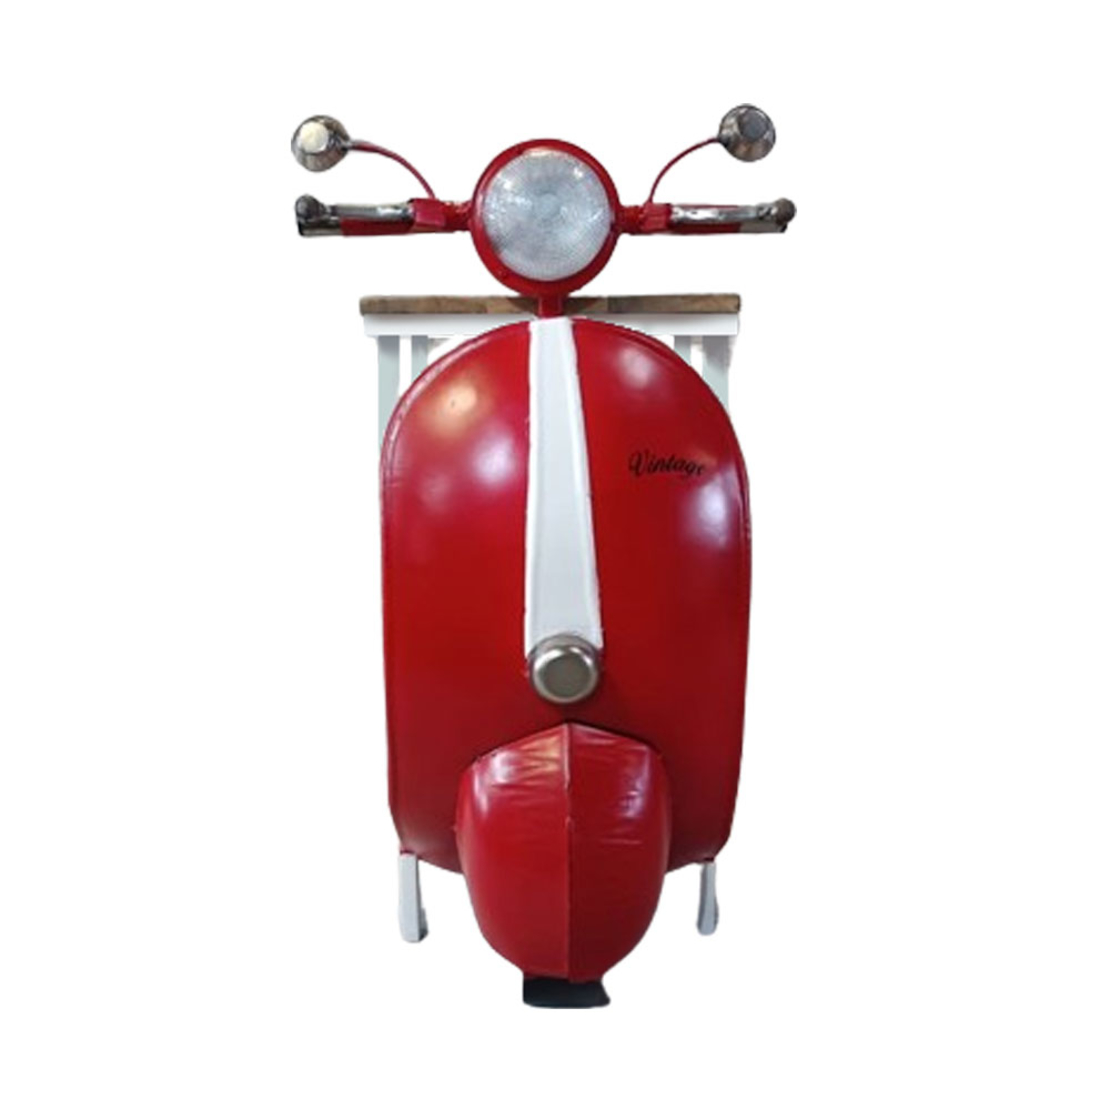 MINI VESPA SIDE TABLE WITH SHELVES METAL RED WHITE